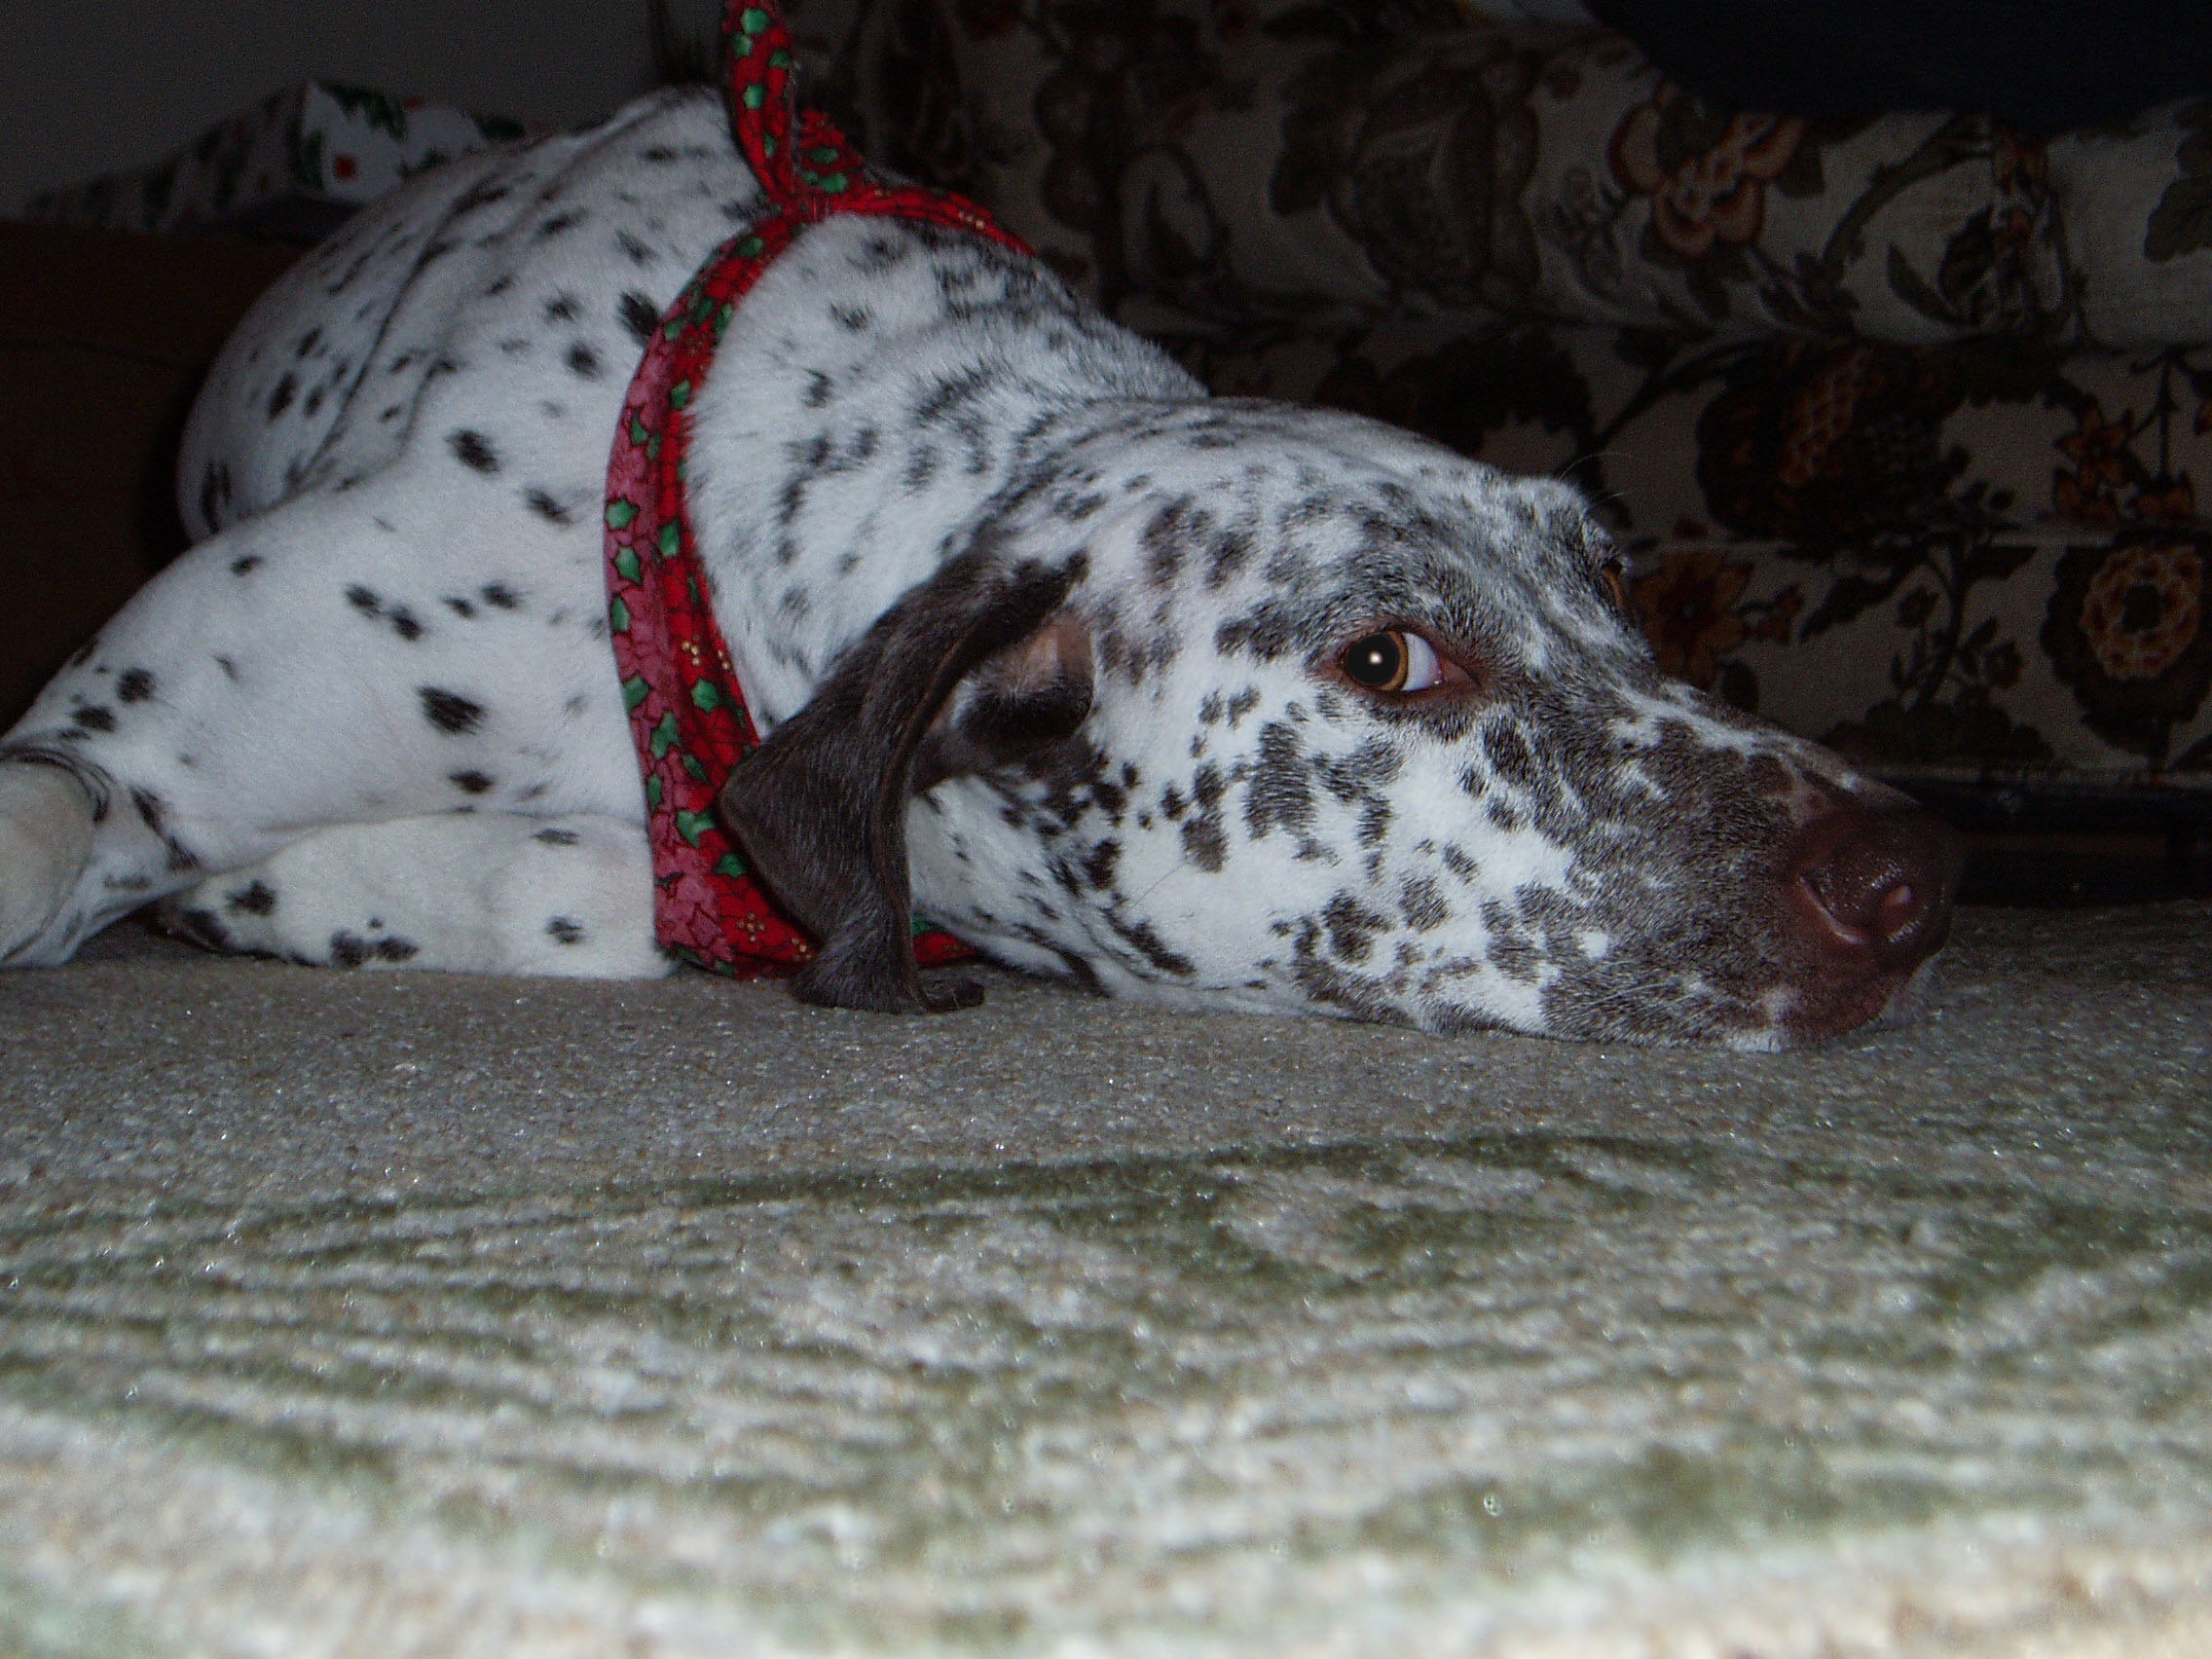 RE: Angel (German Short-haired Pointer/Dalmatian)